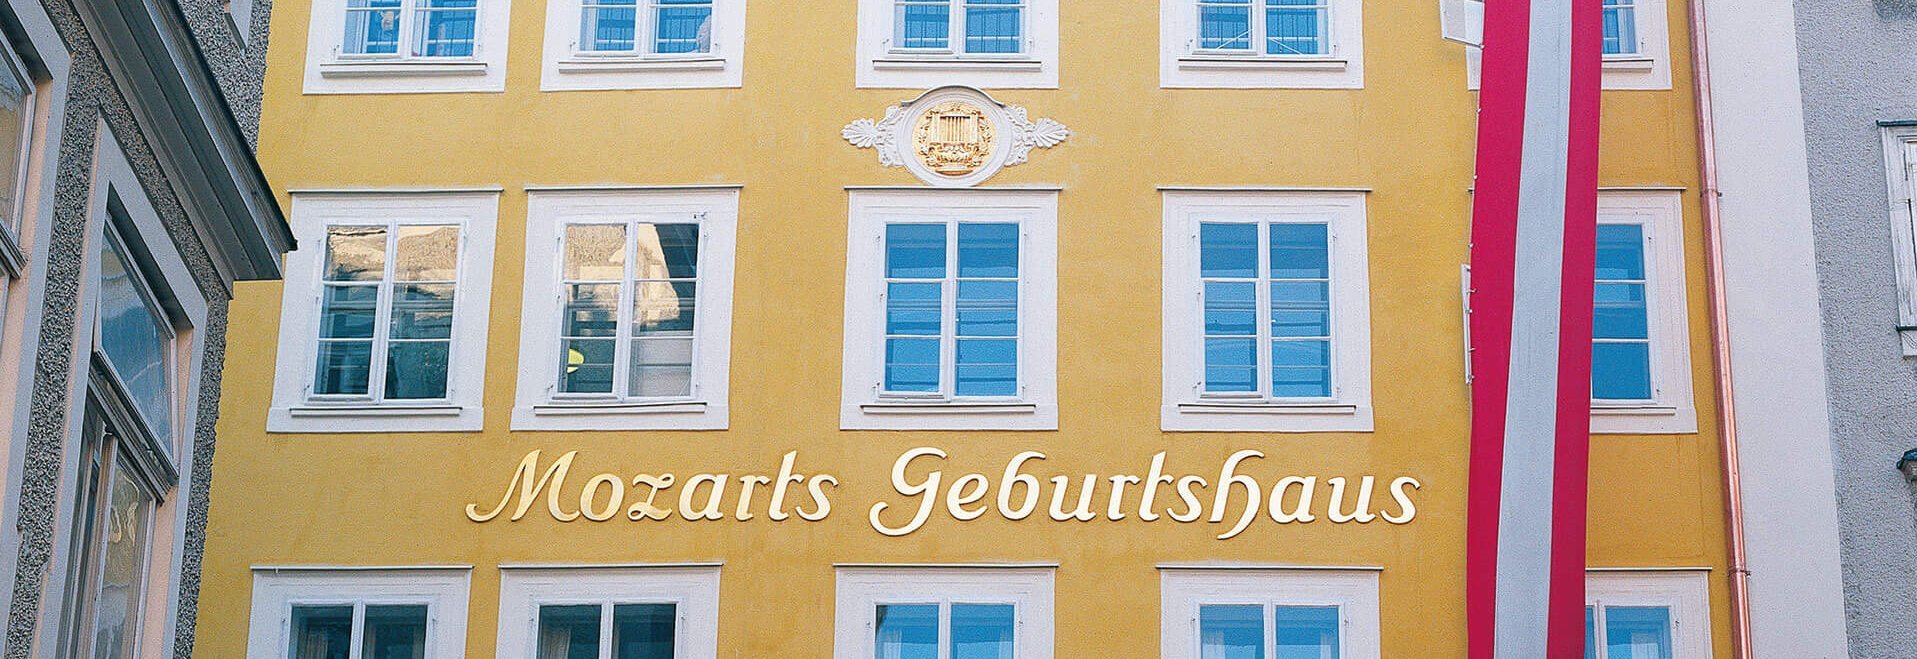 House of Mozart's birth